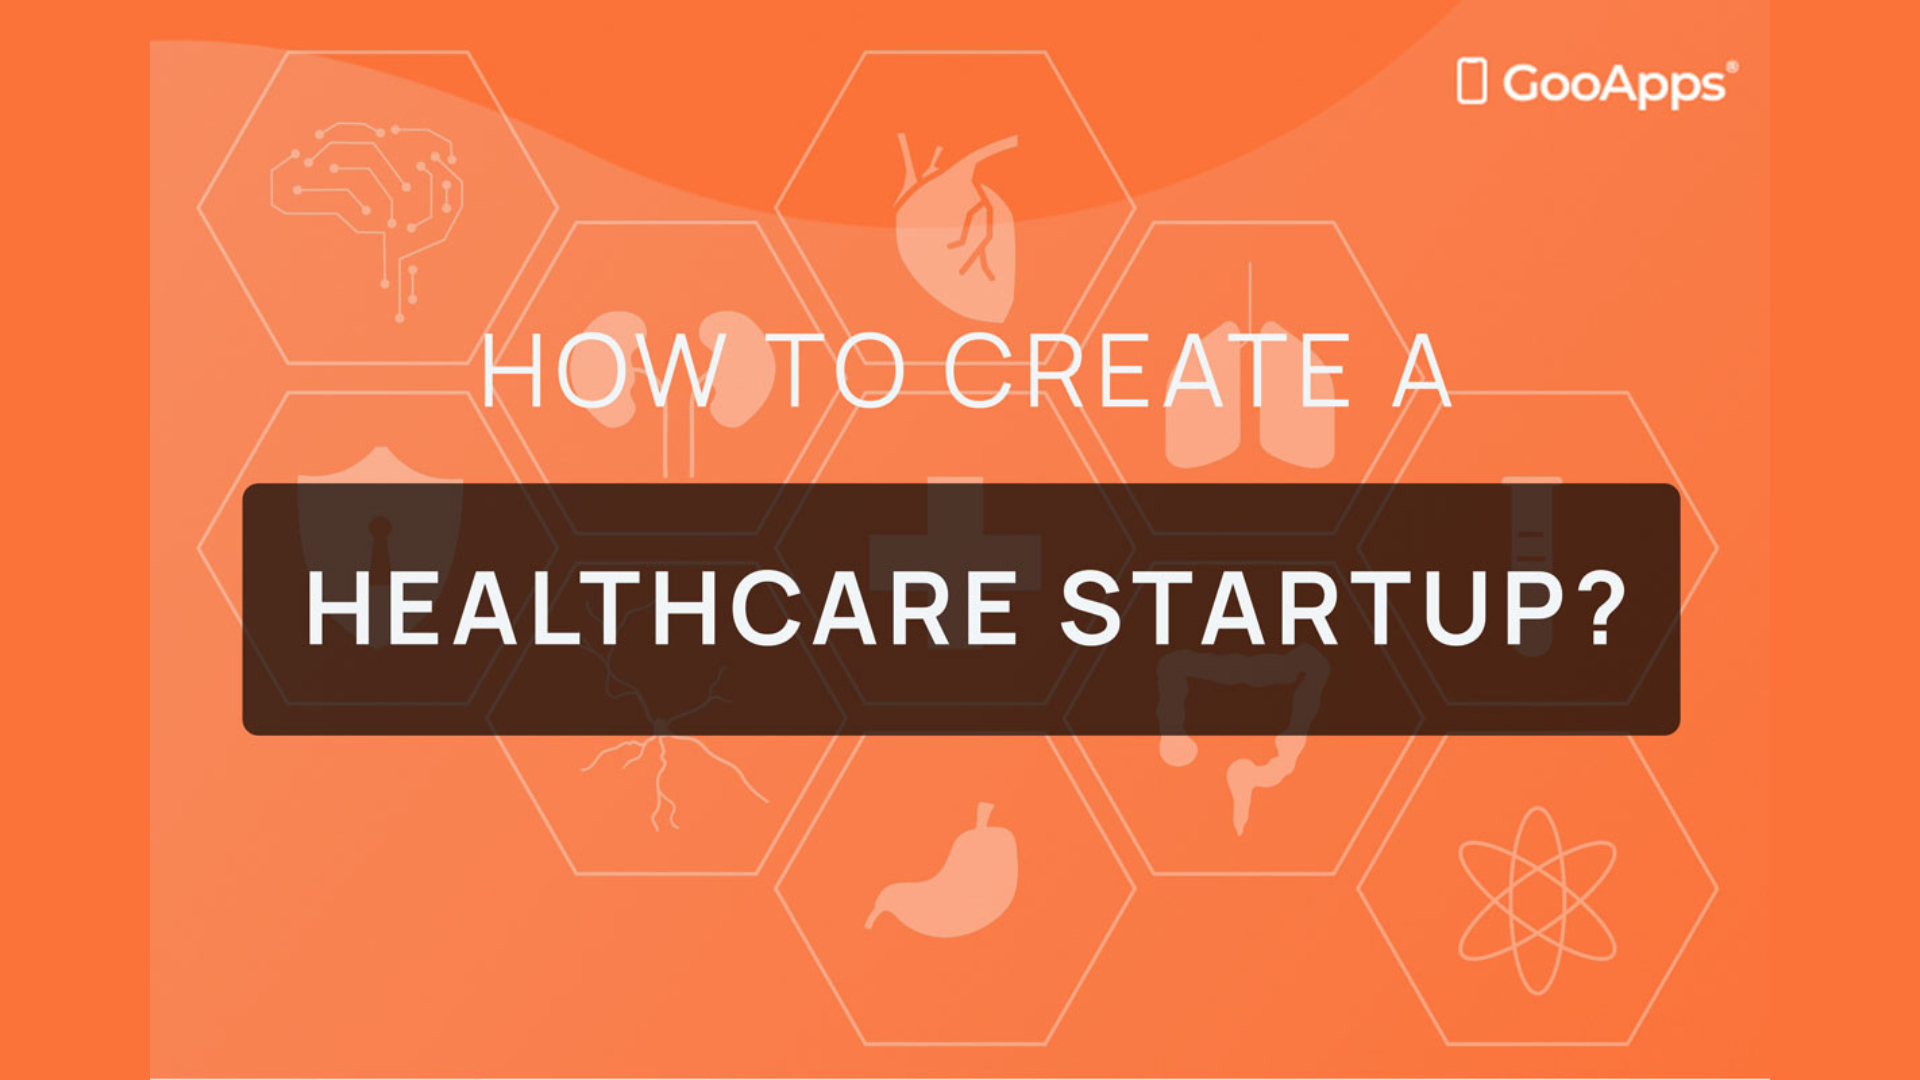 Discover how to create a medical startup - #BHHMembersInitiatives